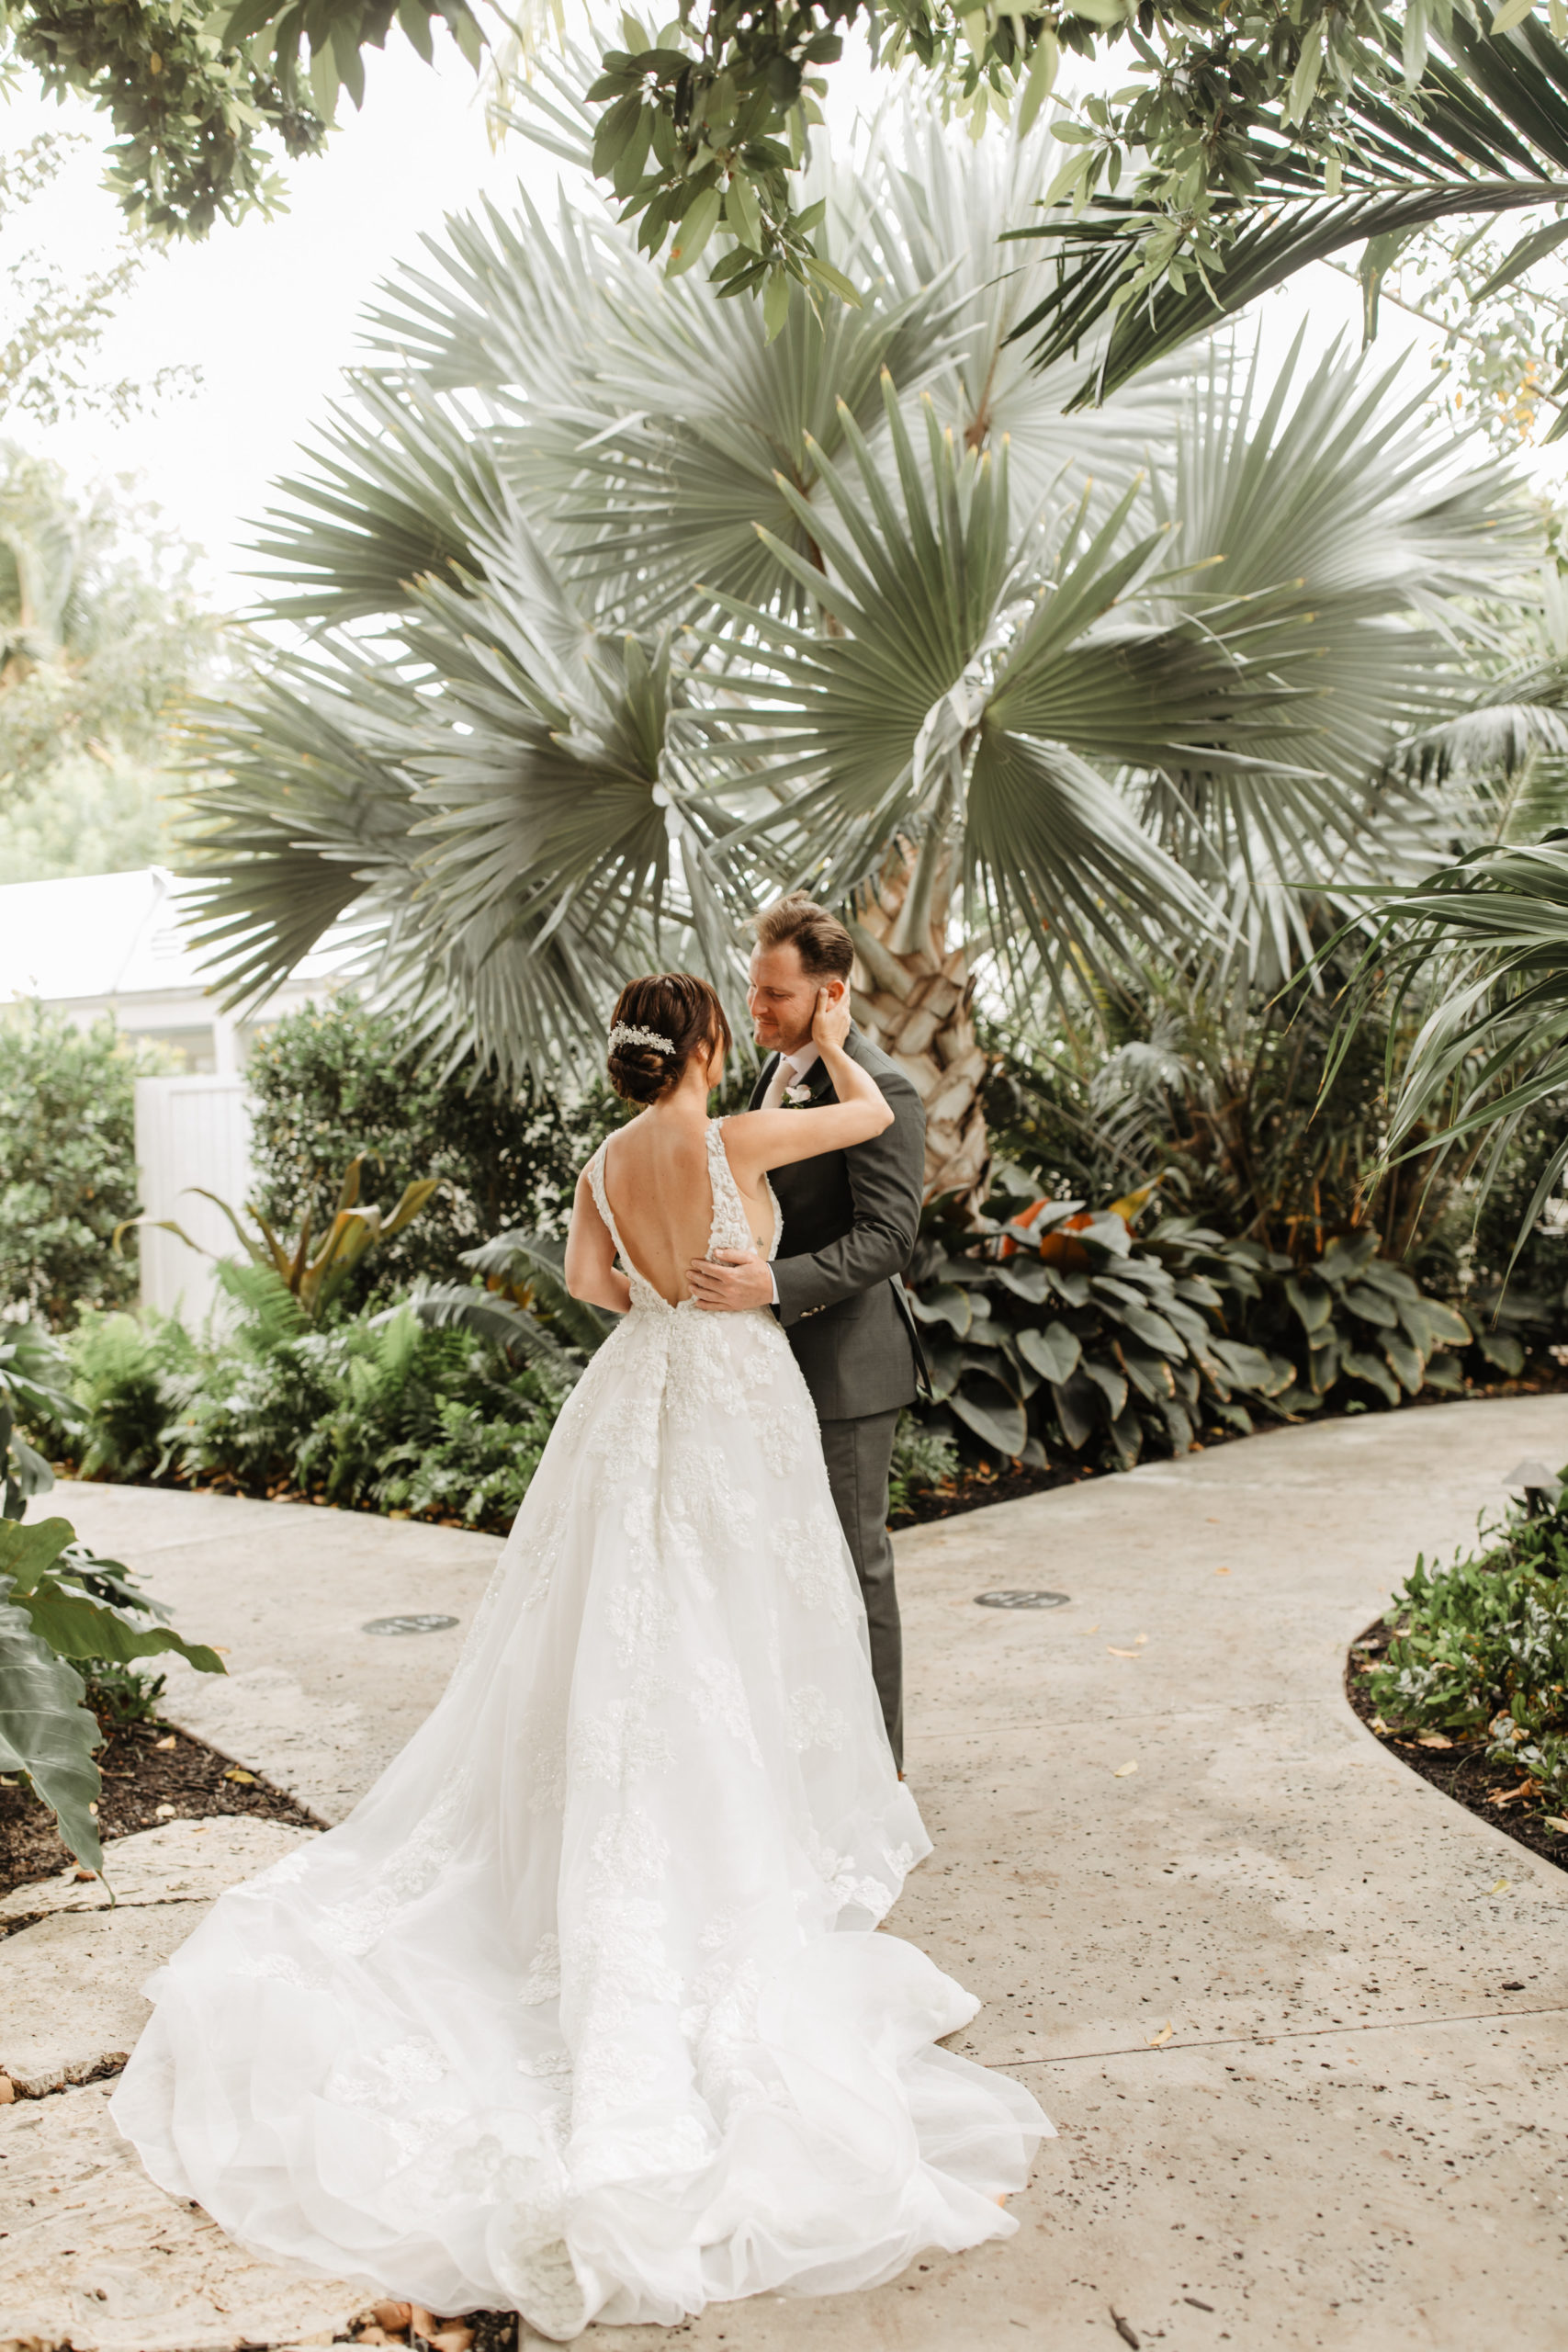 the couples first look captured by the Key West Wedding Photographer